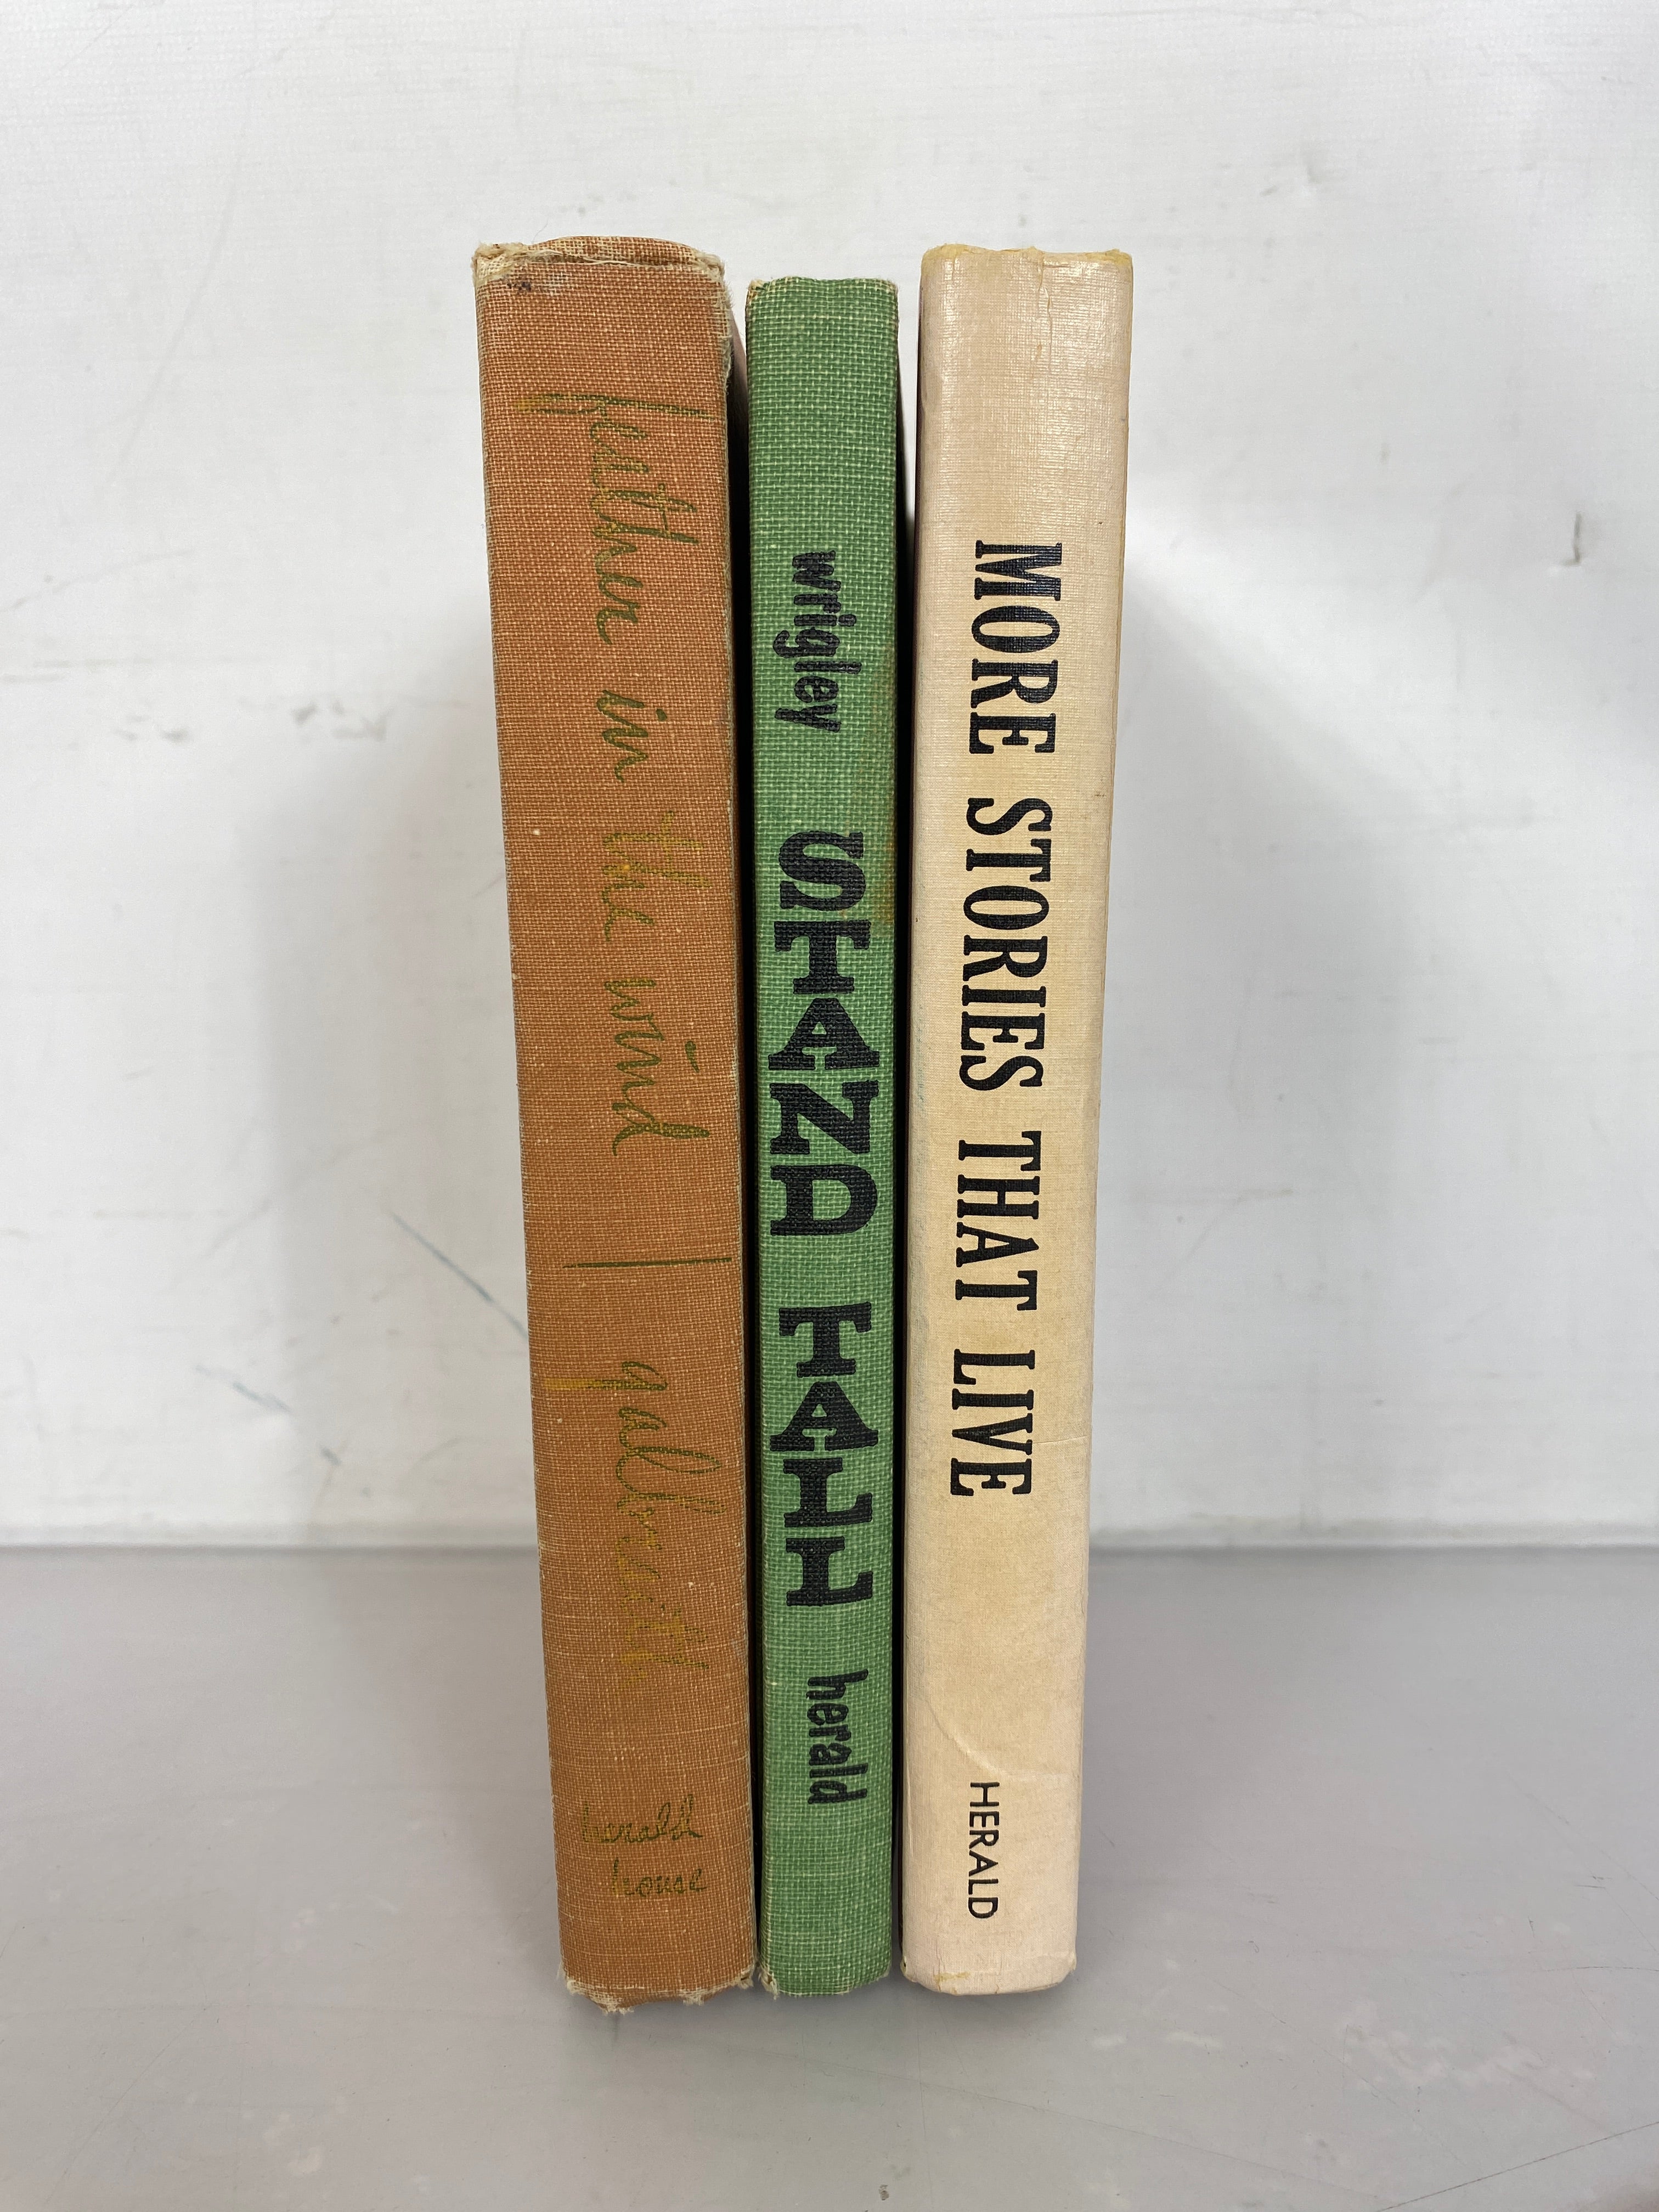 Lot of 3 Christian Novels: Feather in the Wind, Stand Tall, More Stories That Live 1952-1967 HC Herald Publishing House Vintage